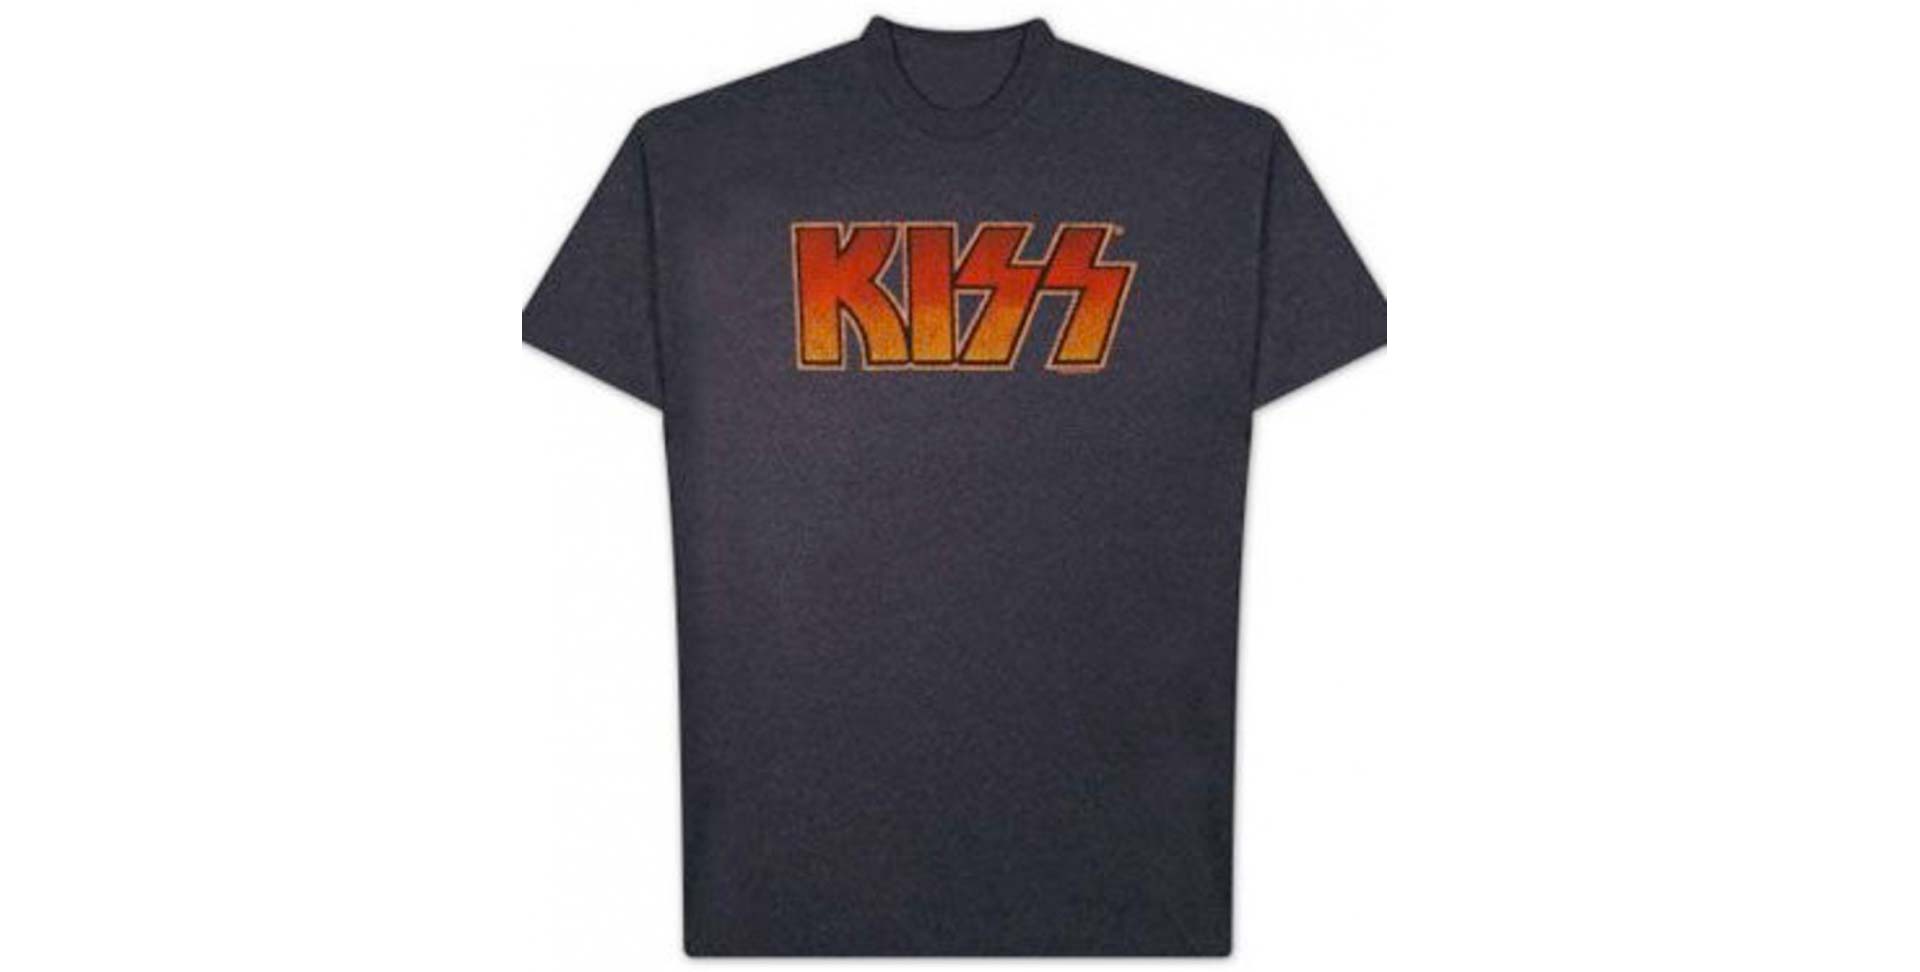 Best band T-shirts: the 25 T-shirts ever